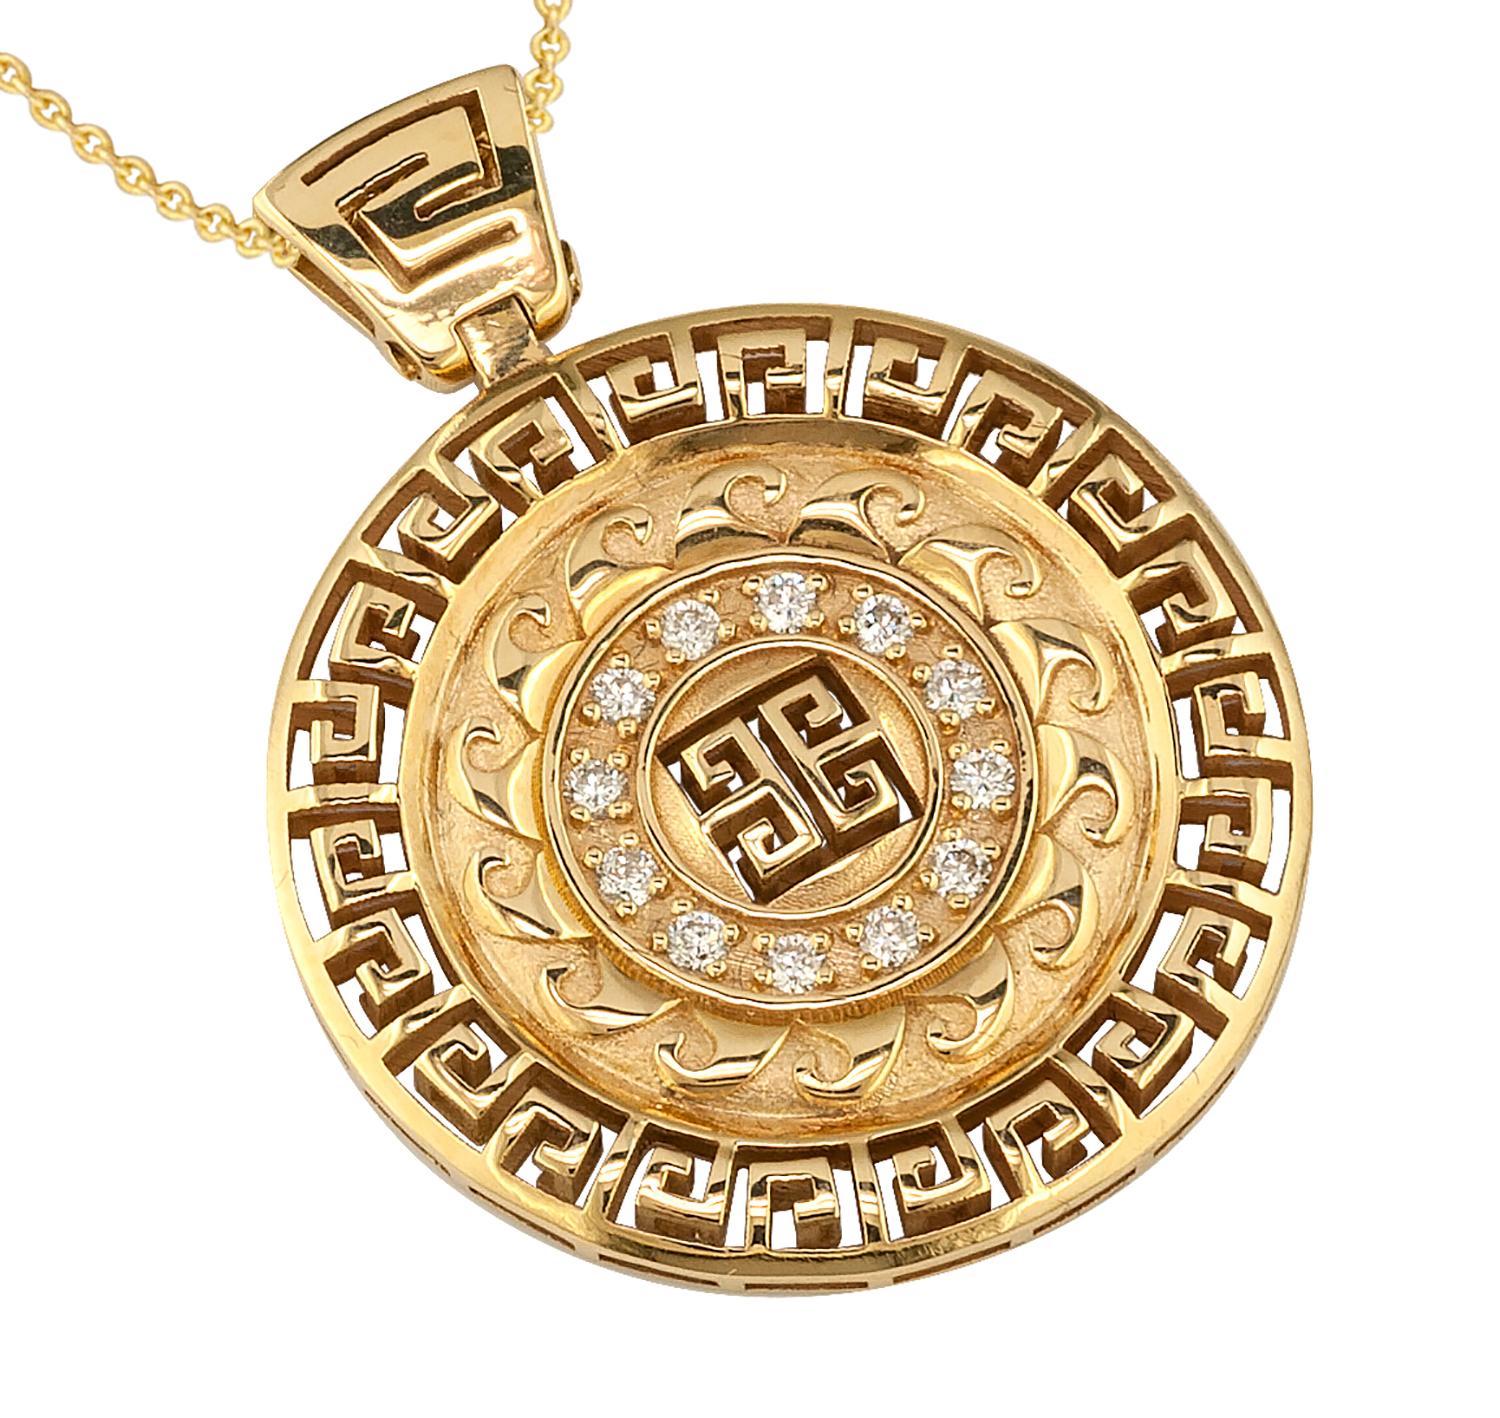 This S.Georgios designer pendant necklace is handmade from solid 18 Karat Yellow Gold and is microscopically carved with a unique Greek Key design to create a stunning art piece. This beautiful pendant features 12 brilliant-cut White Diamonds with a